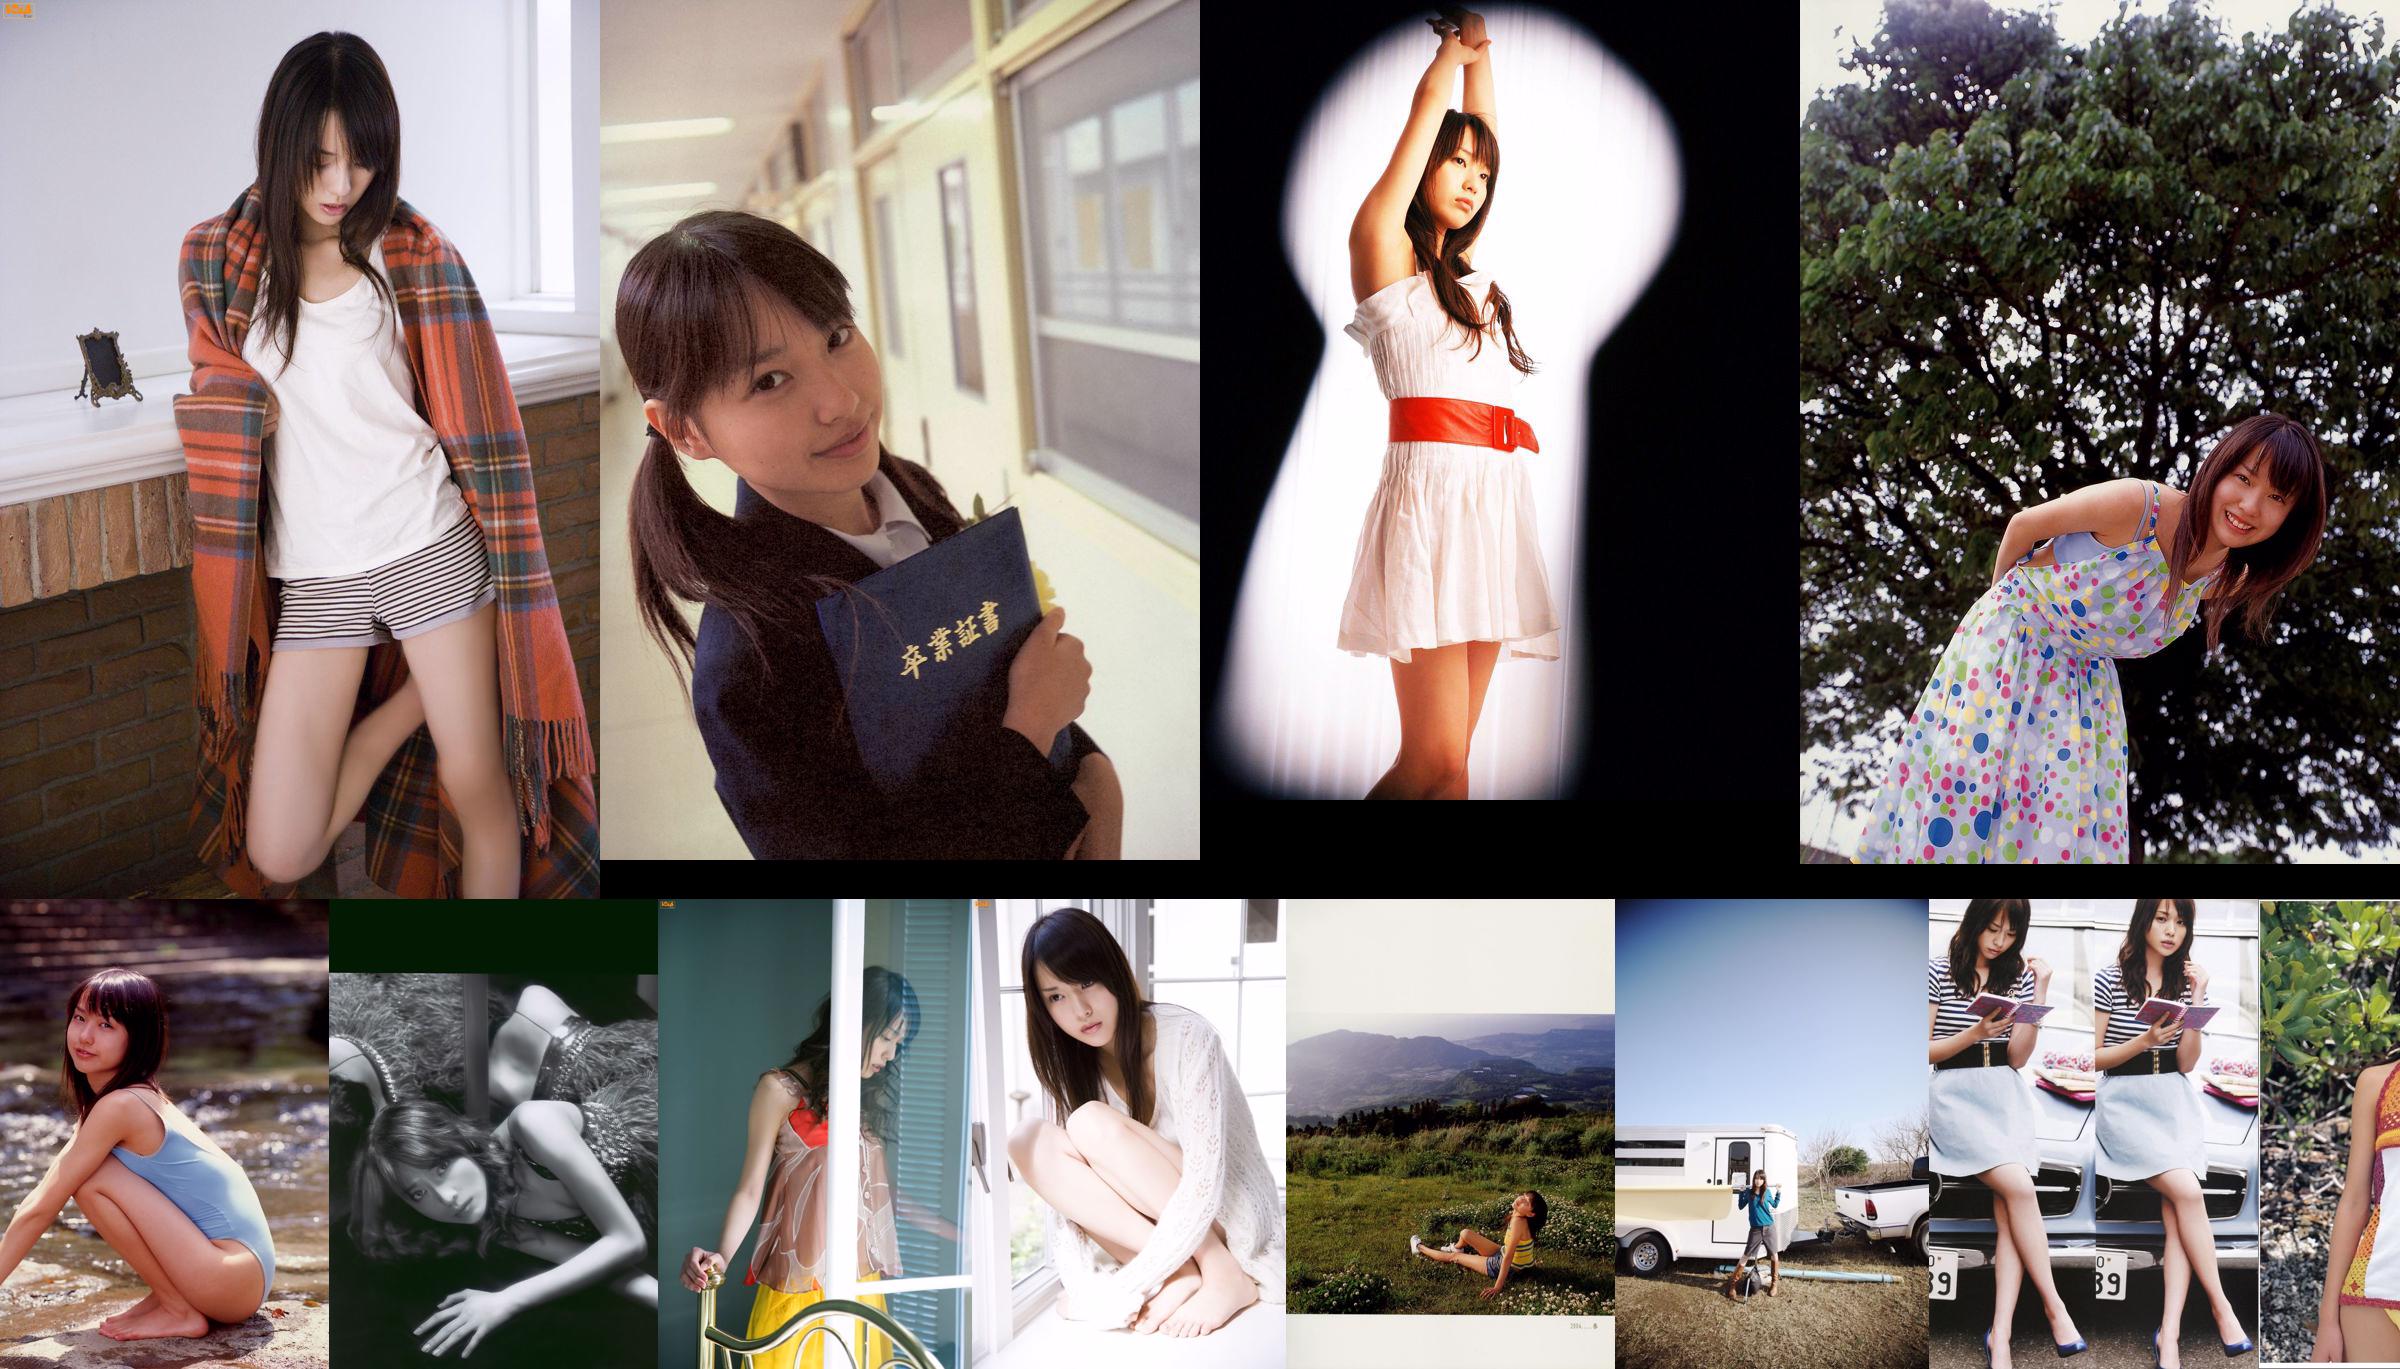 [Bomb.TV] May 2007 Erika Toda Erika Toda / Erika Toda No.fe3a94 Page 7